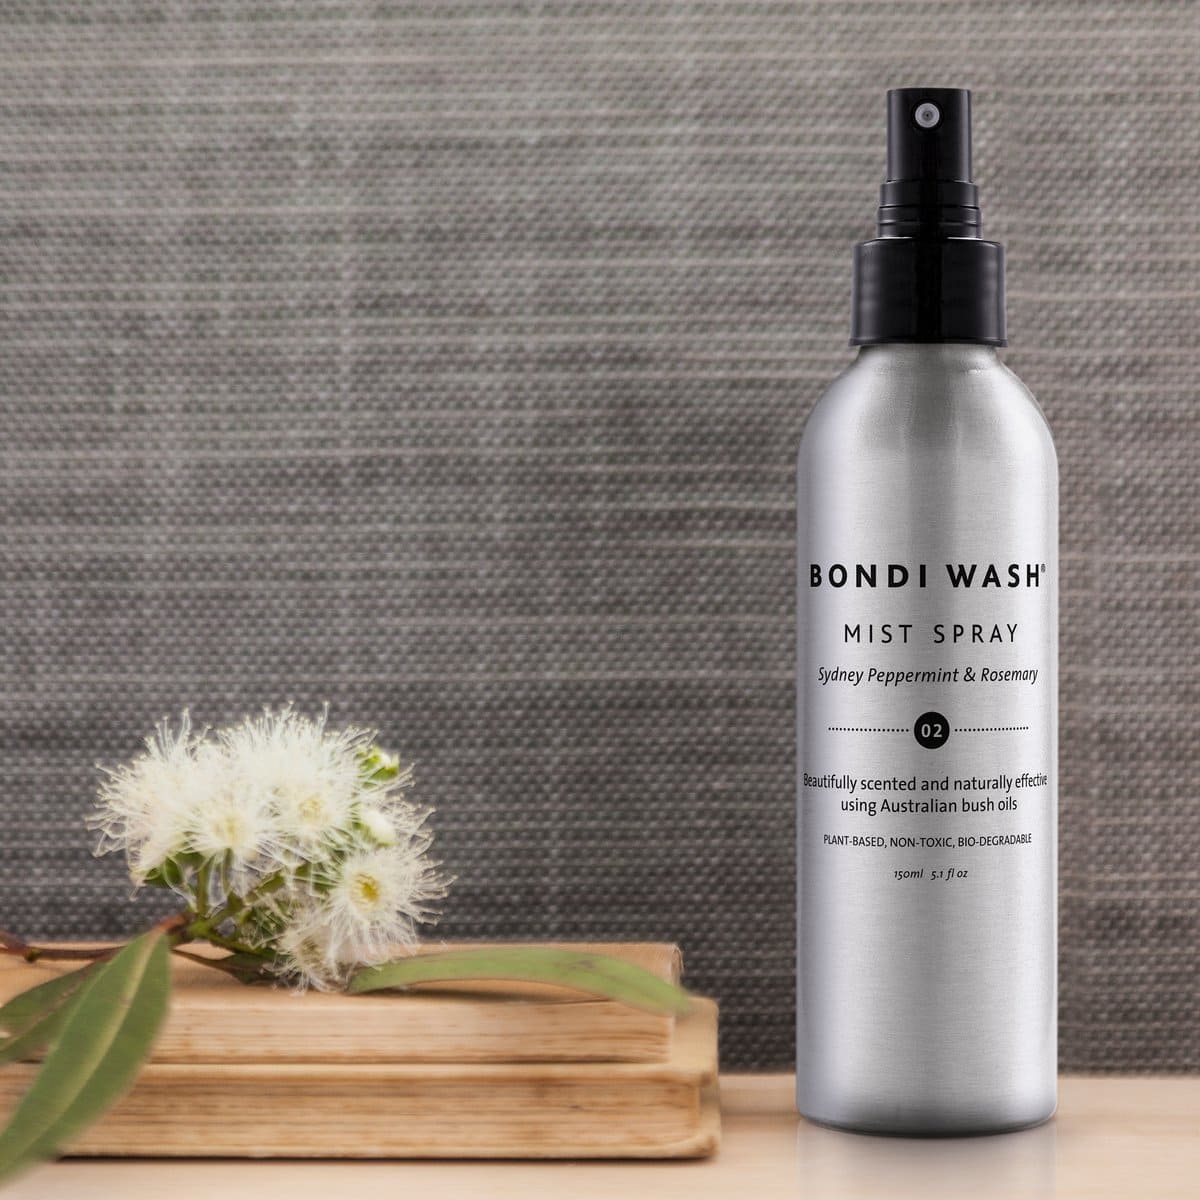 Bondi Wash, Mist Spray, Multi Purpose Mist Spray, australian botanicals, home & cleaning, eco clean, sustainable living, home care, natural mist spray, refreshing, toxic free, cleaning, Sydney Peppermint & Rosemary